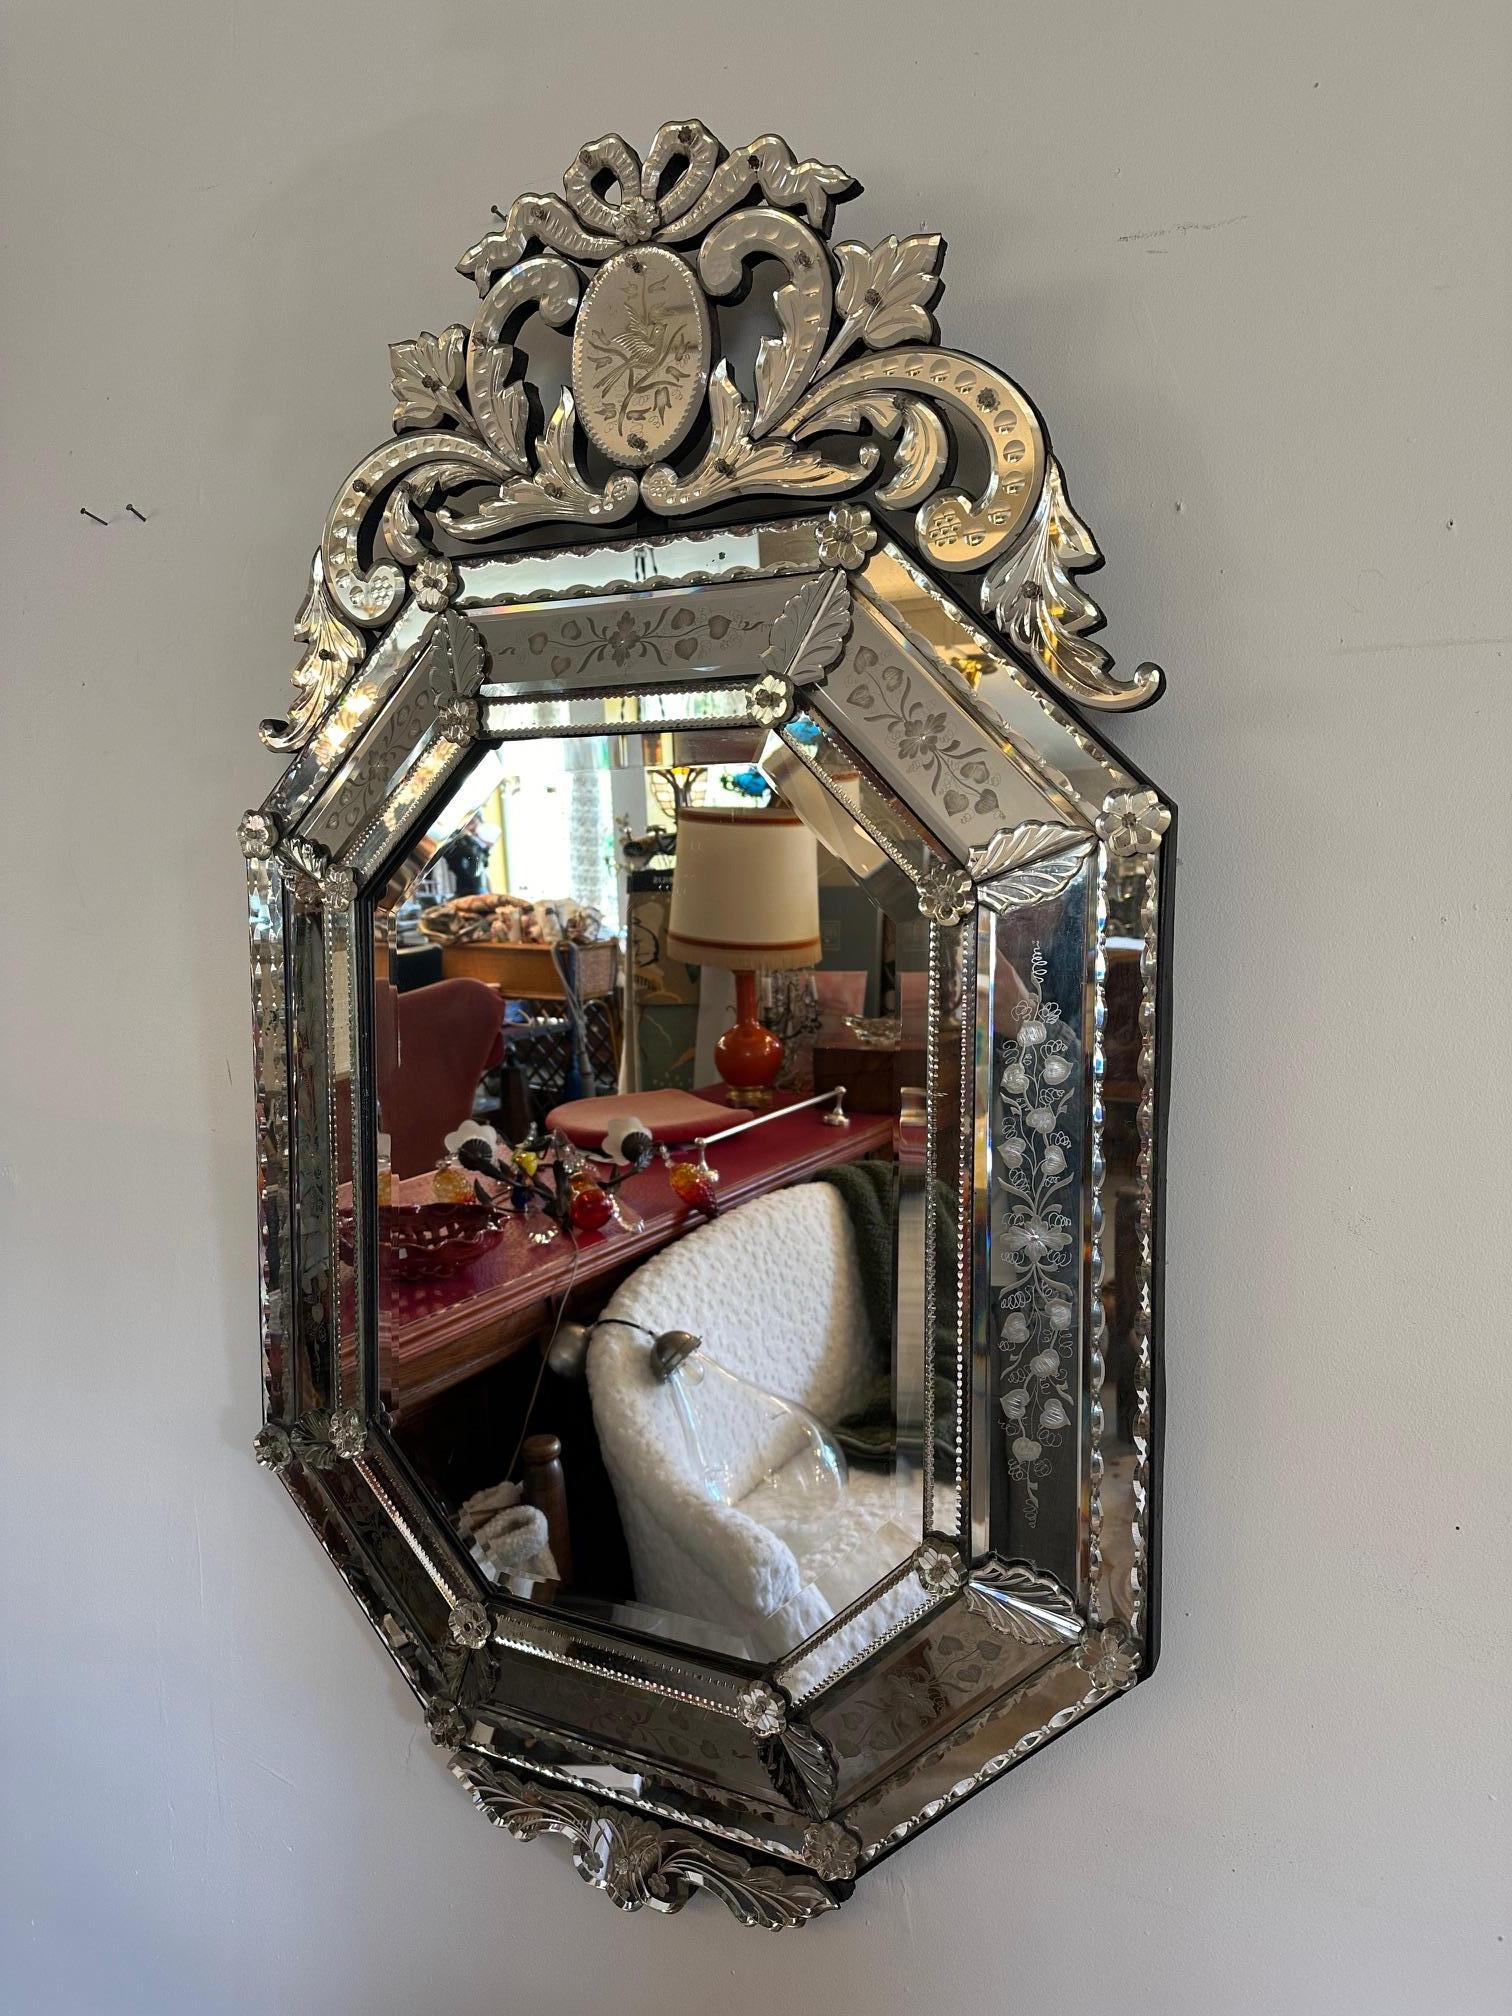 19th century Magnificent octagonal Venetian mirror dating from the Napoleon III period (1870s), a real antique one!
In remarkable condition for its age. Only half of a glass leaf is broken (possibility of changing it). Beveled mirror.
Decorated with